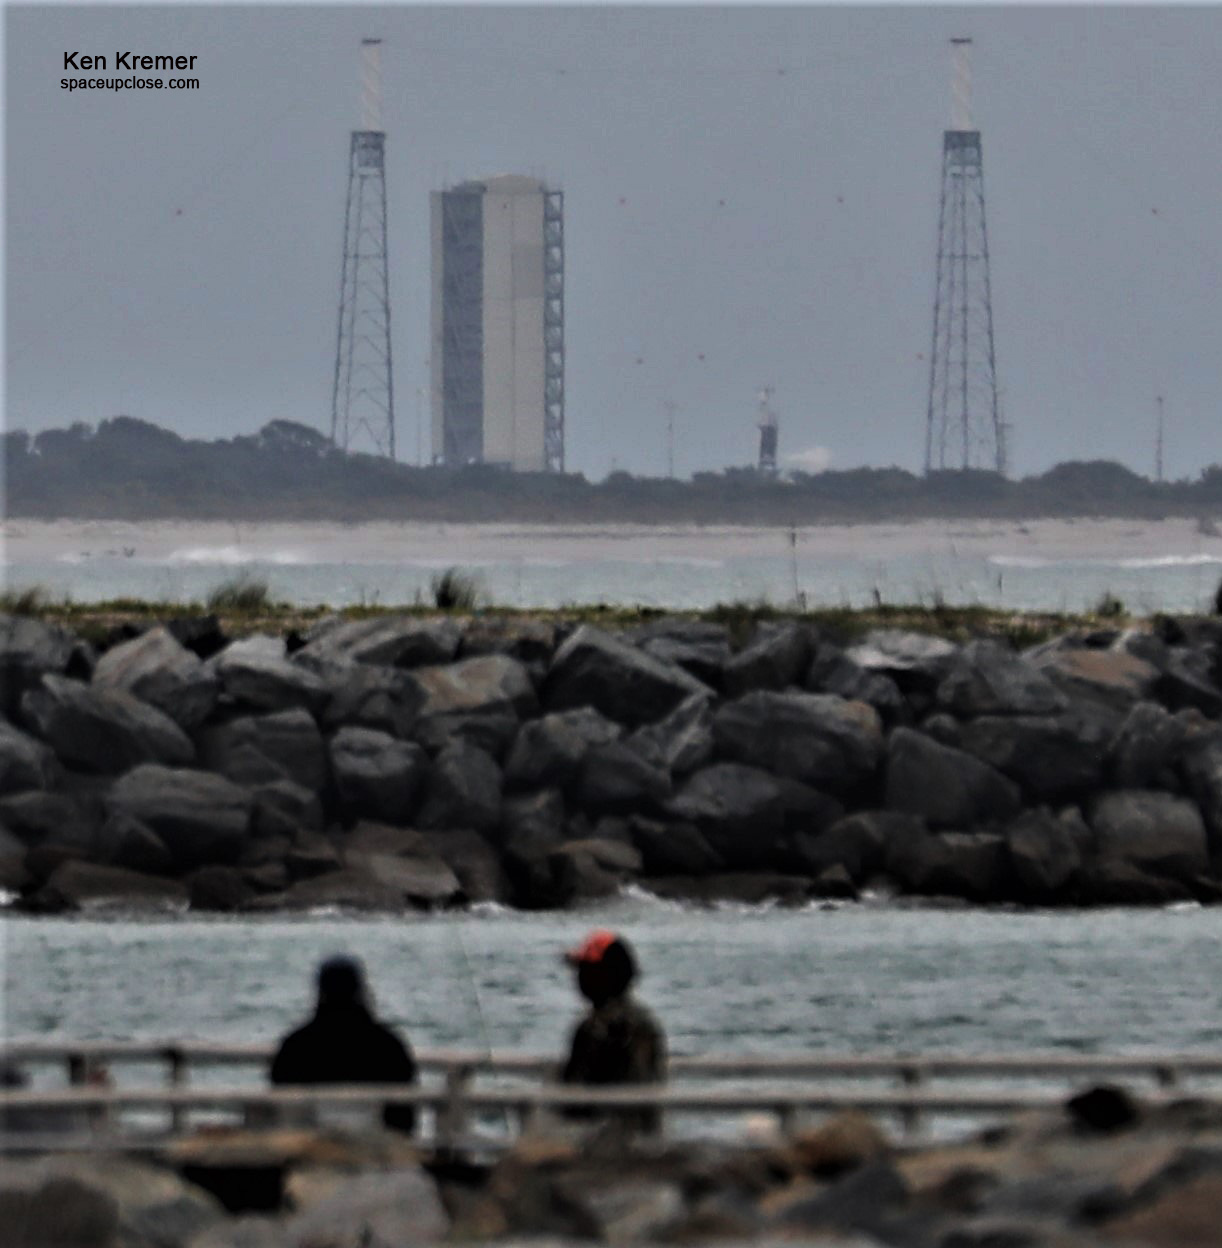 Astra Scrubs First Launch Attempt from Cape Canaveral: Photos